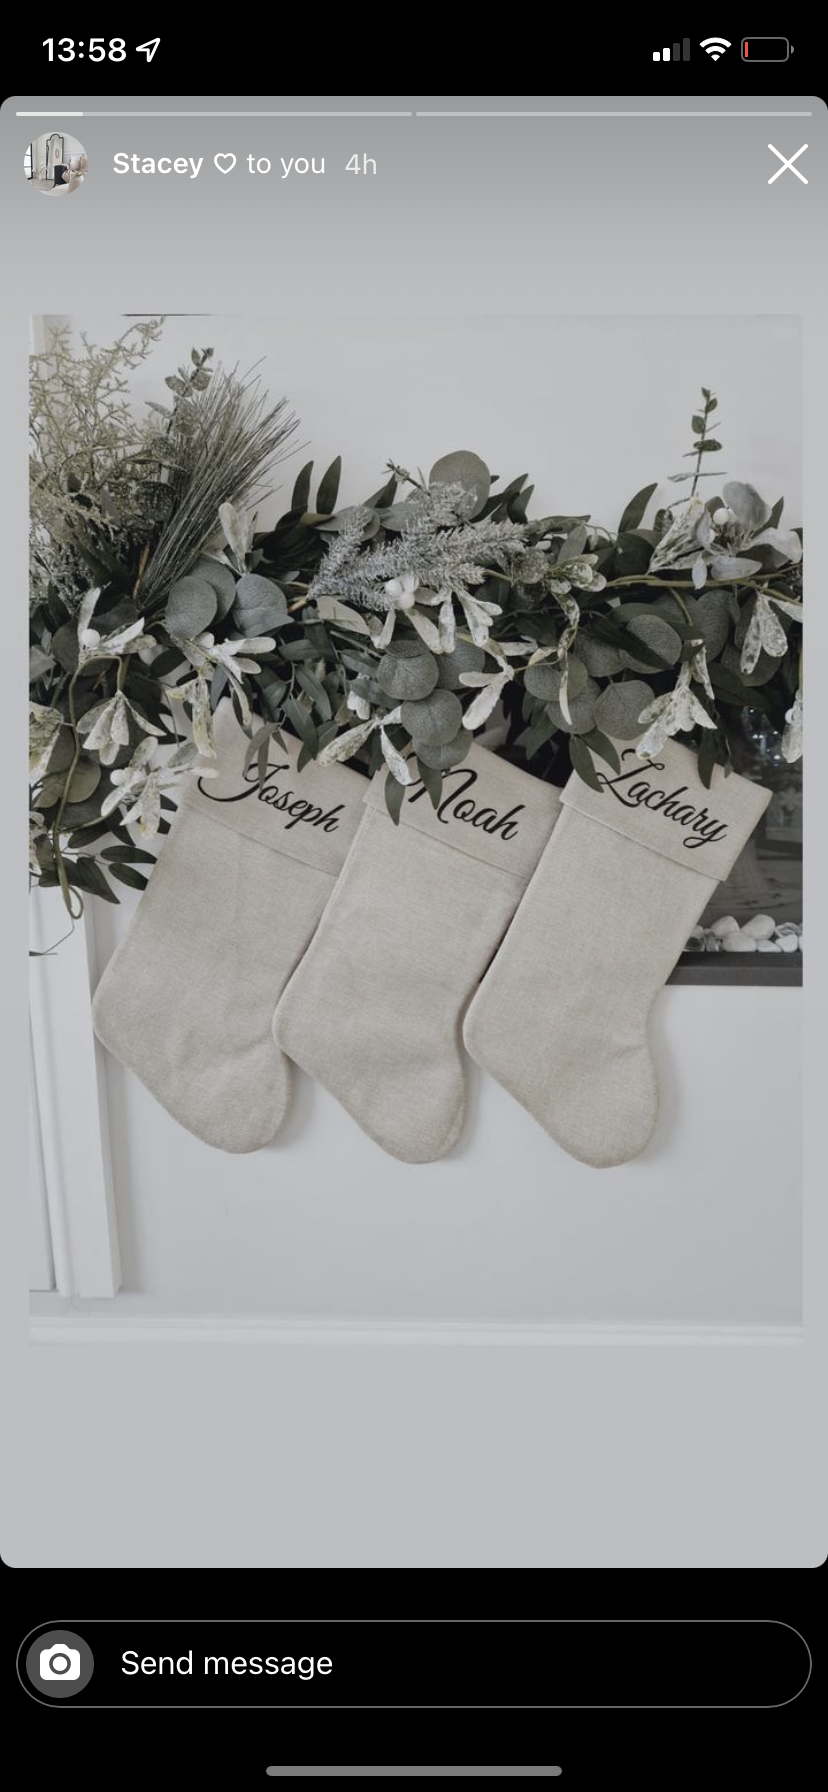 Grey and white personalised Christmas stocking